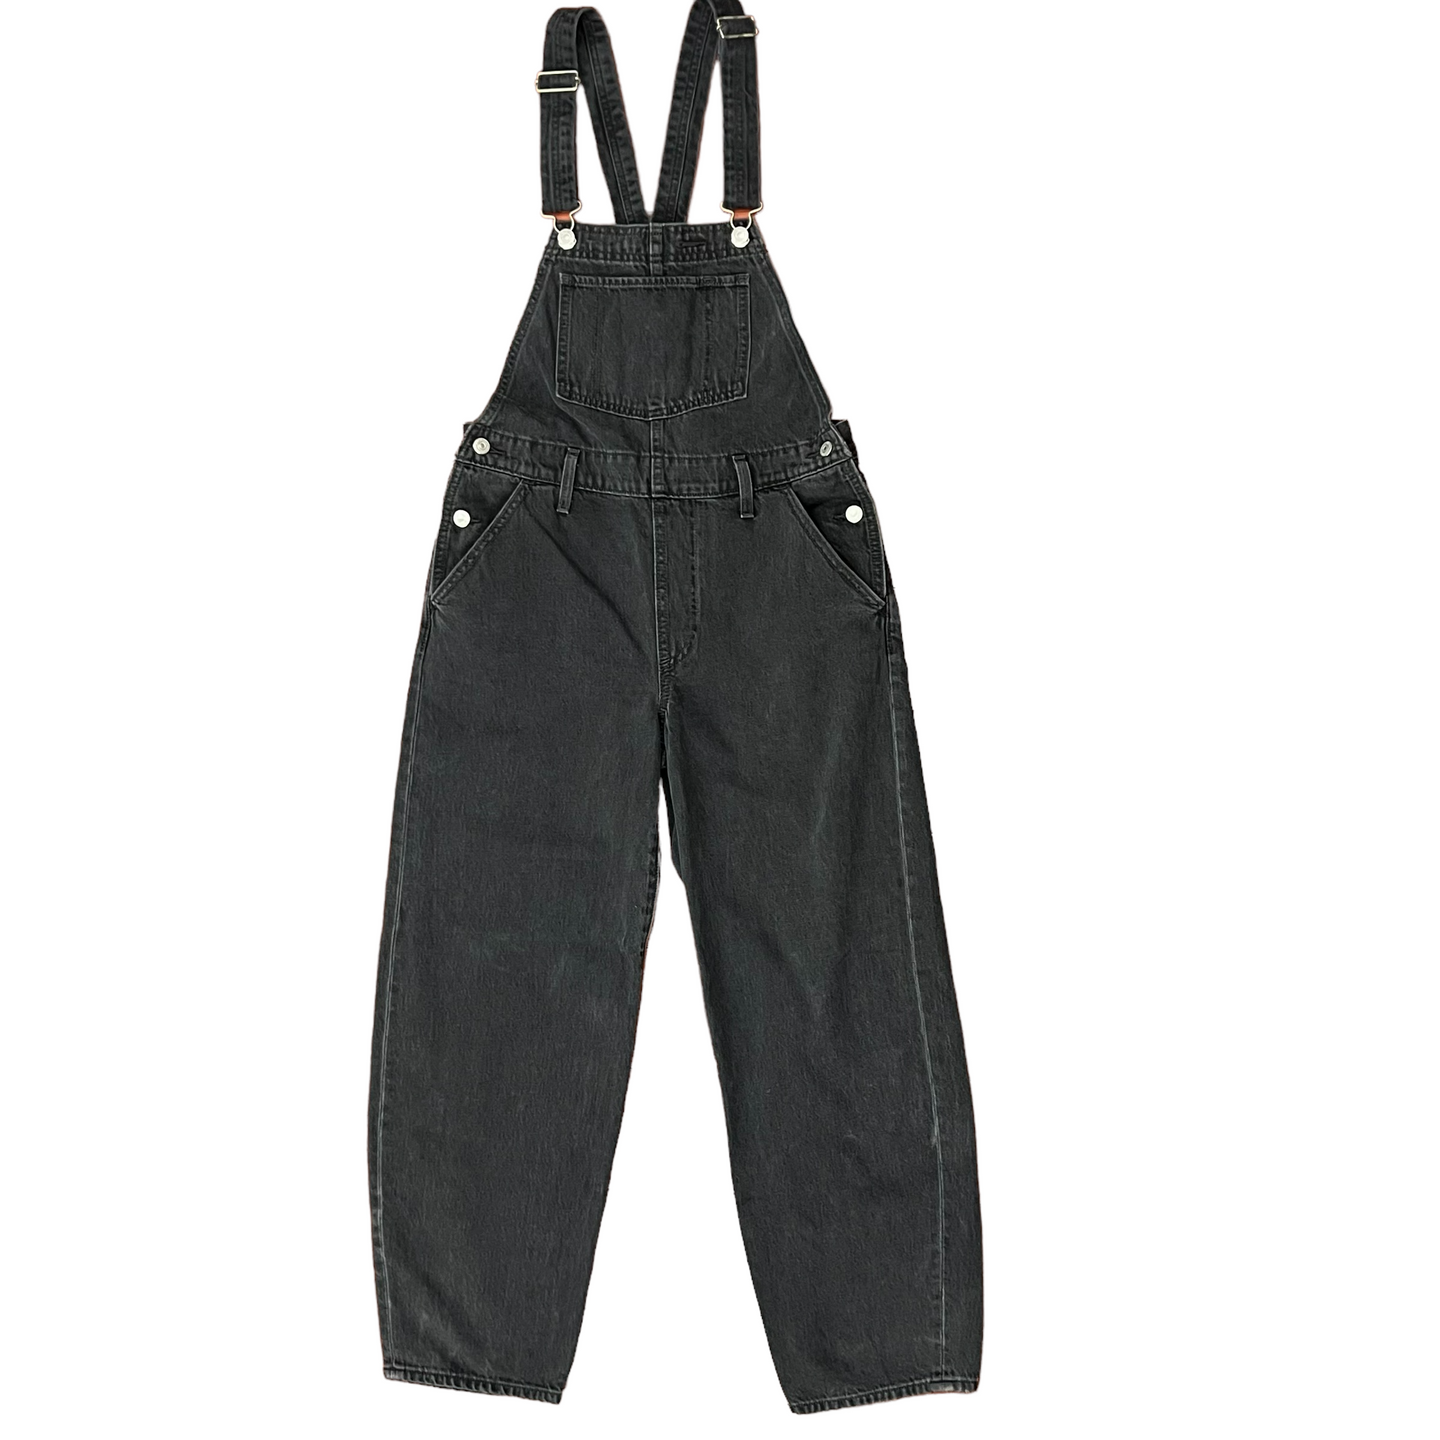 Levi's Baggy Fit Overalls - Women's  Size Small. Color: Dark Gray. 100% cotton.